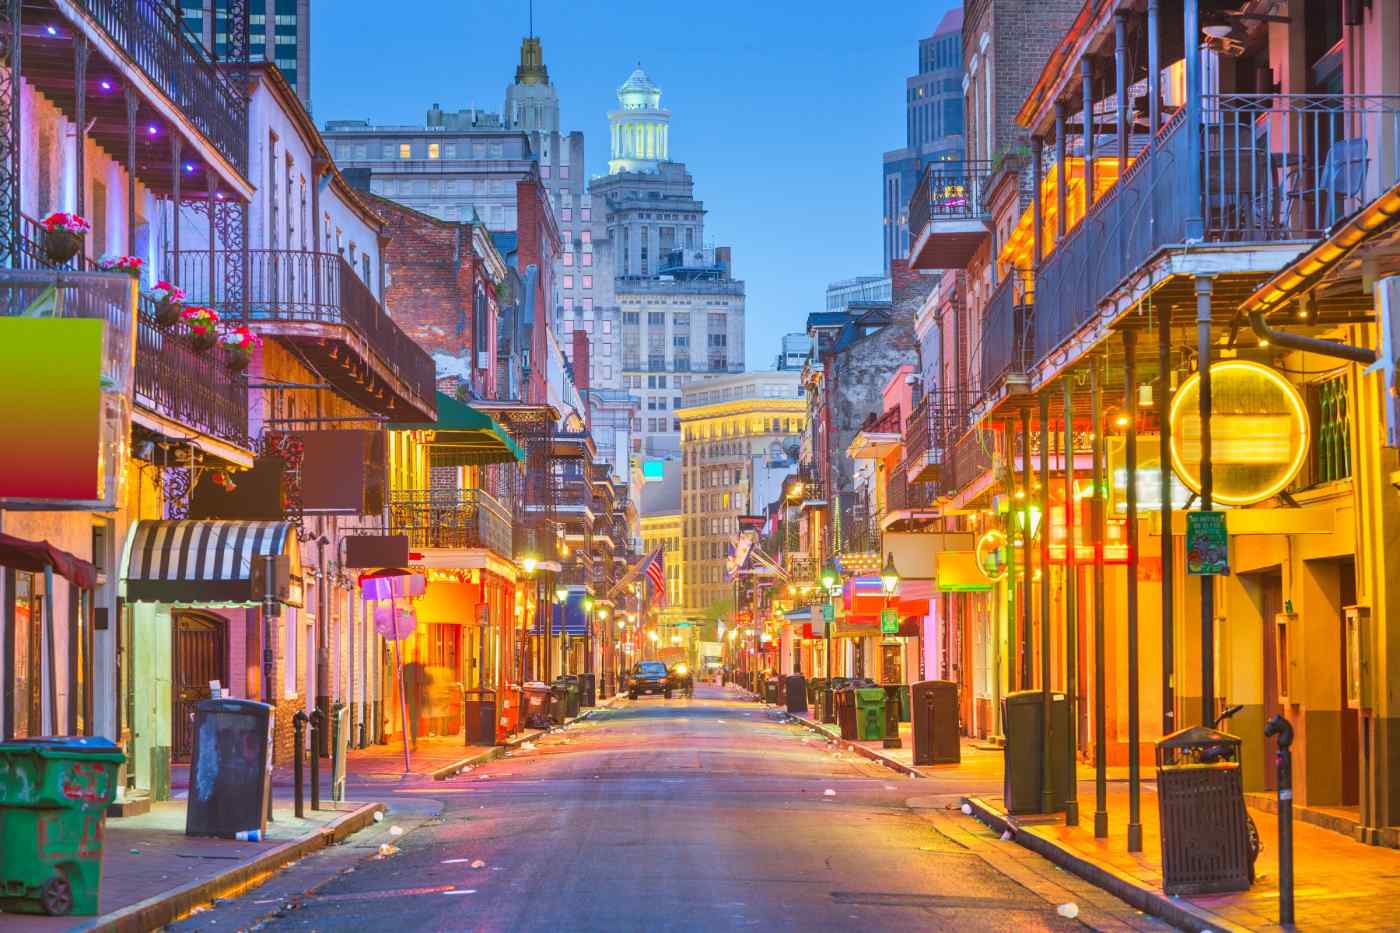 New Orleans Vacation Packages & Deals Inclusive of Flight & Hotel